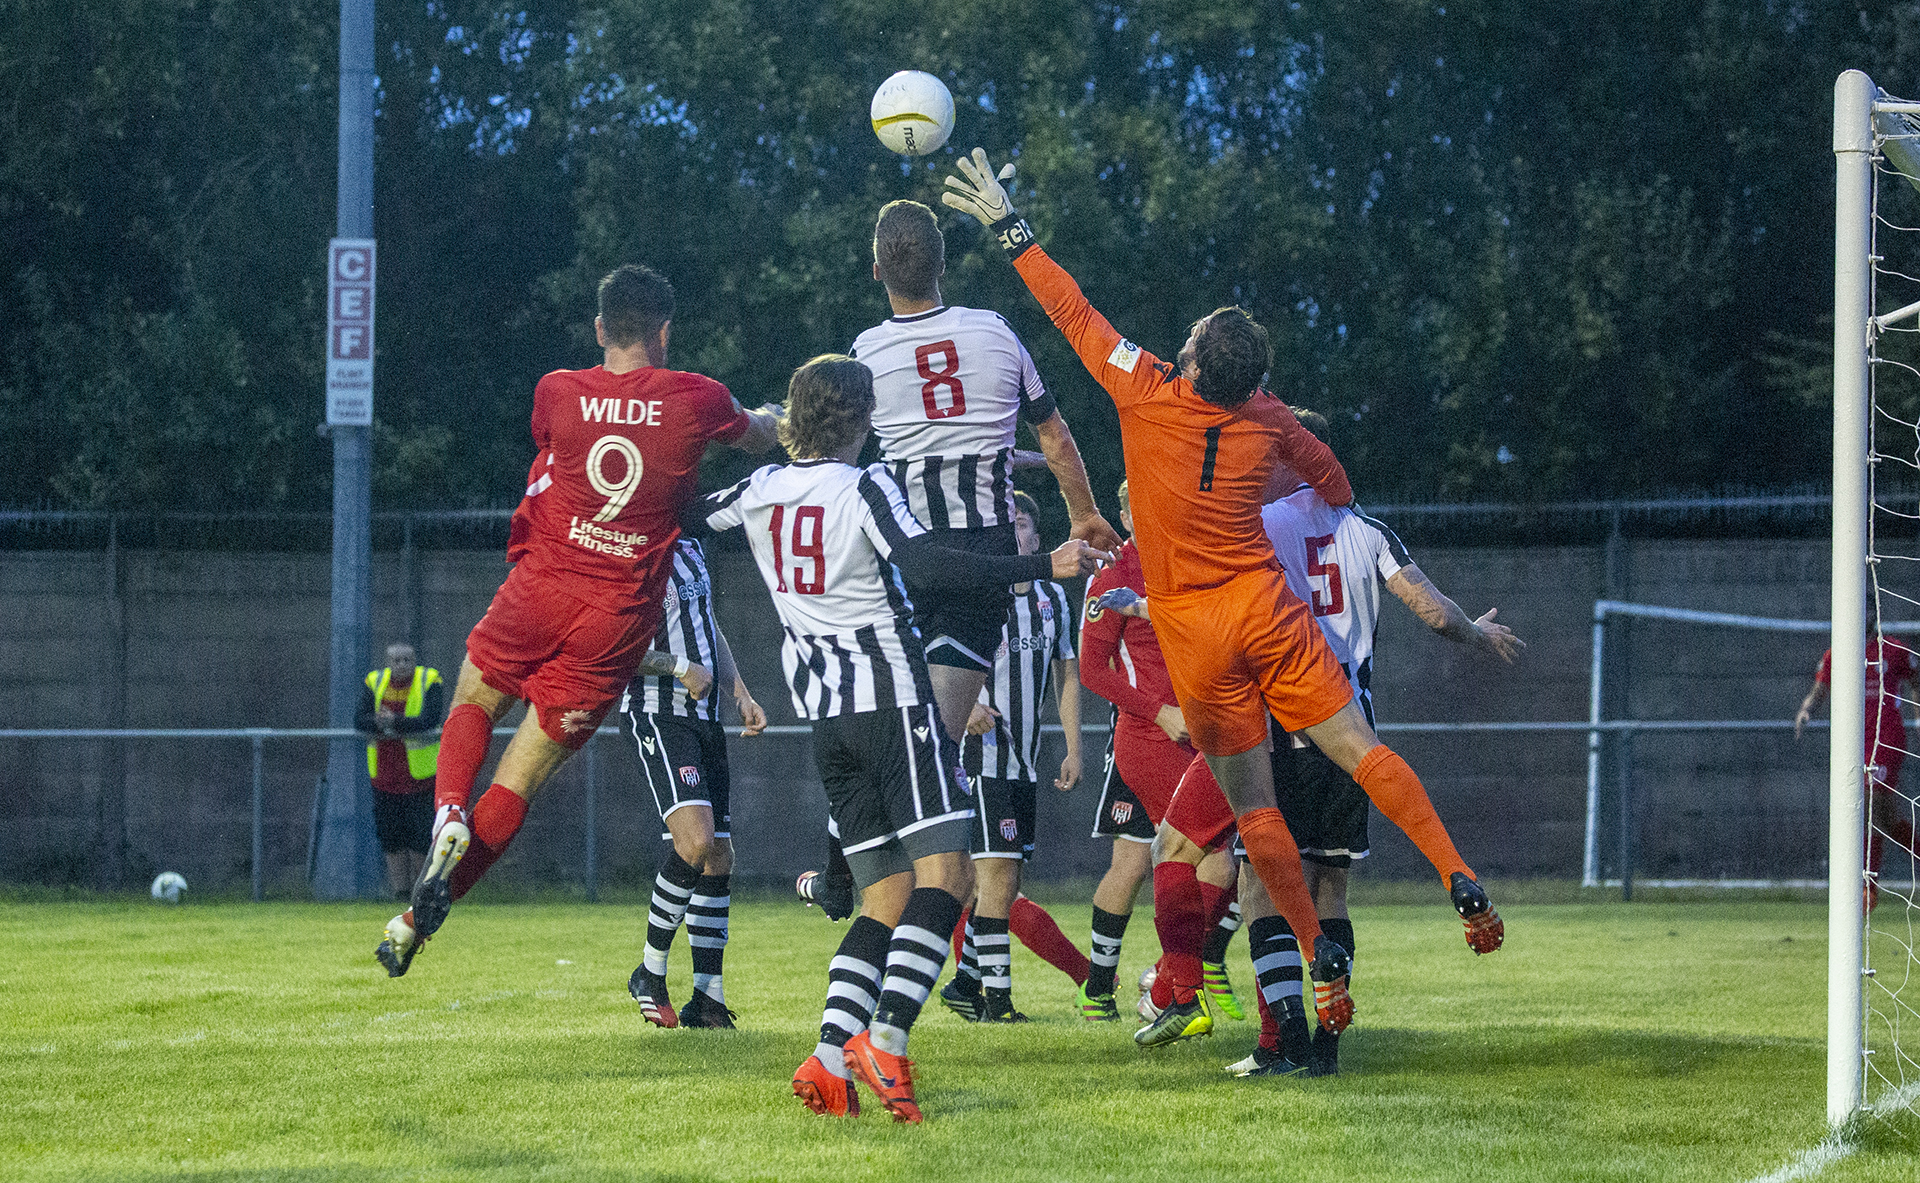 Ex-Nomads John Danby looks to keep Mike Wilde at bay | © NCM Media